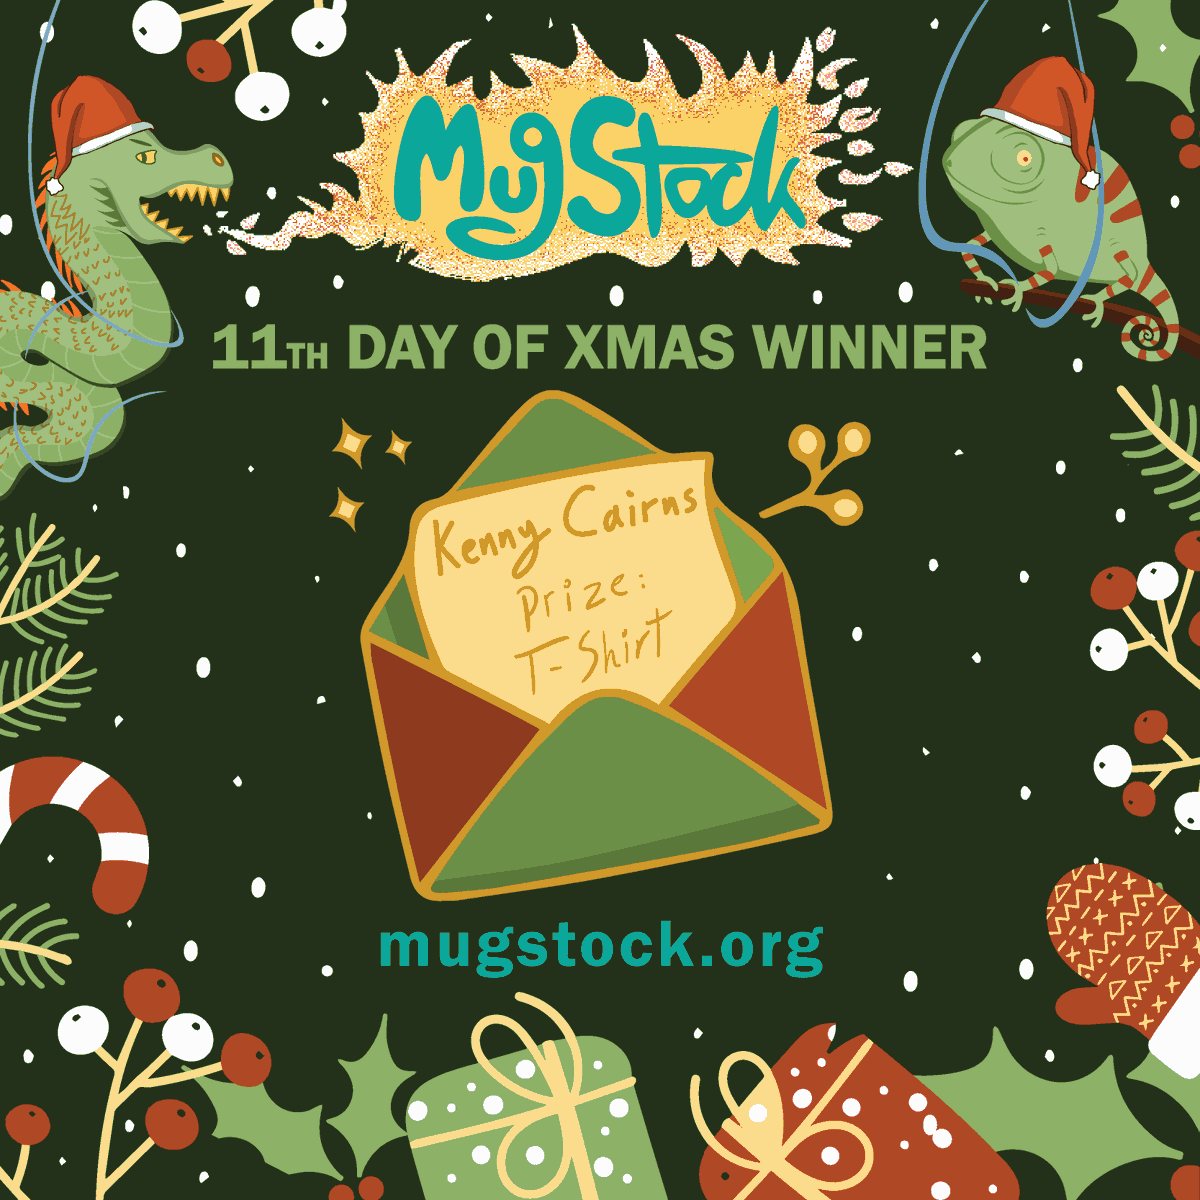 Congratulations to the eleventh winner of our 12 Days of Christmas Giveaway! 🎉✨ There's still one last gift up for grabs (a pair of adult weekend tickets) 🎫🎫 So make sure to get your tickets to be entered into this giveaway 🎟️ mugstock.org/tickets/